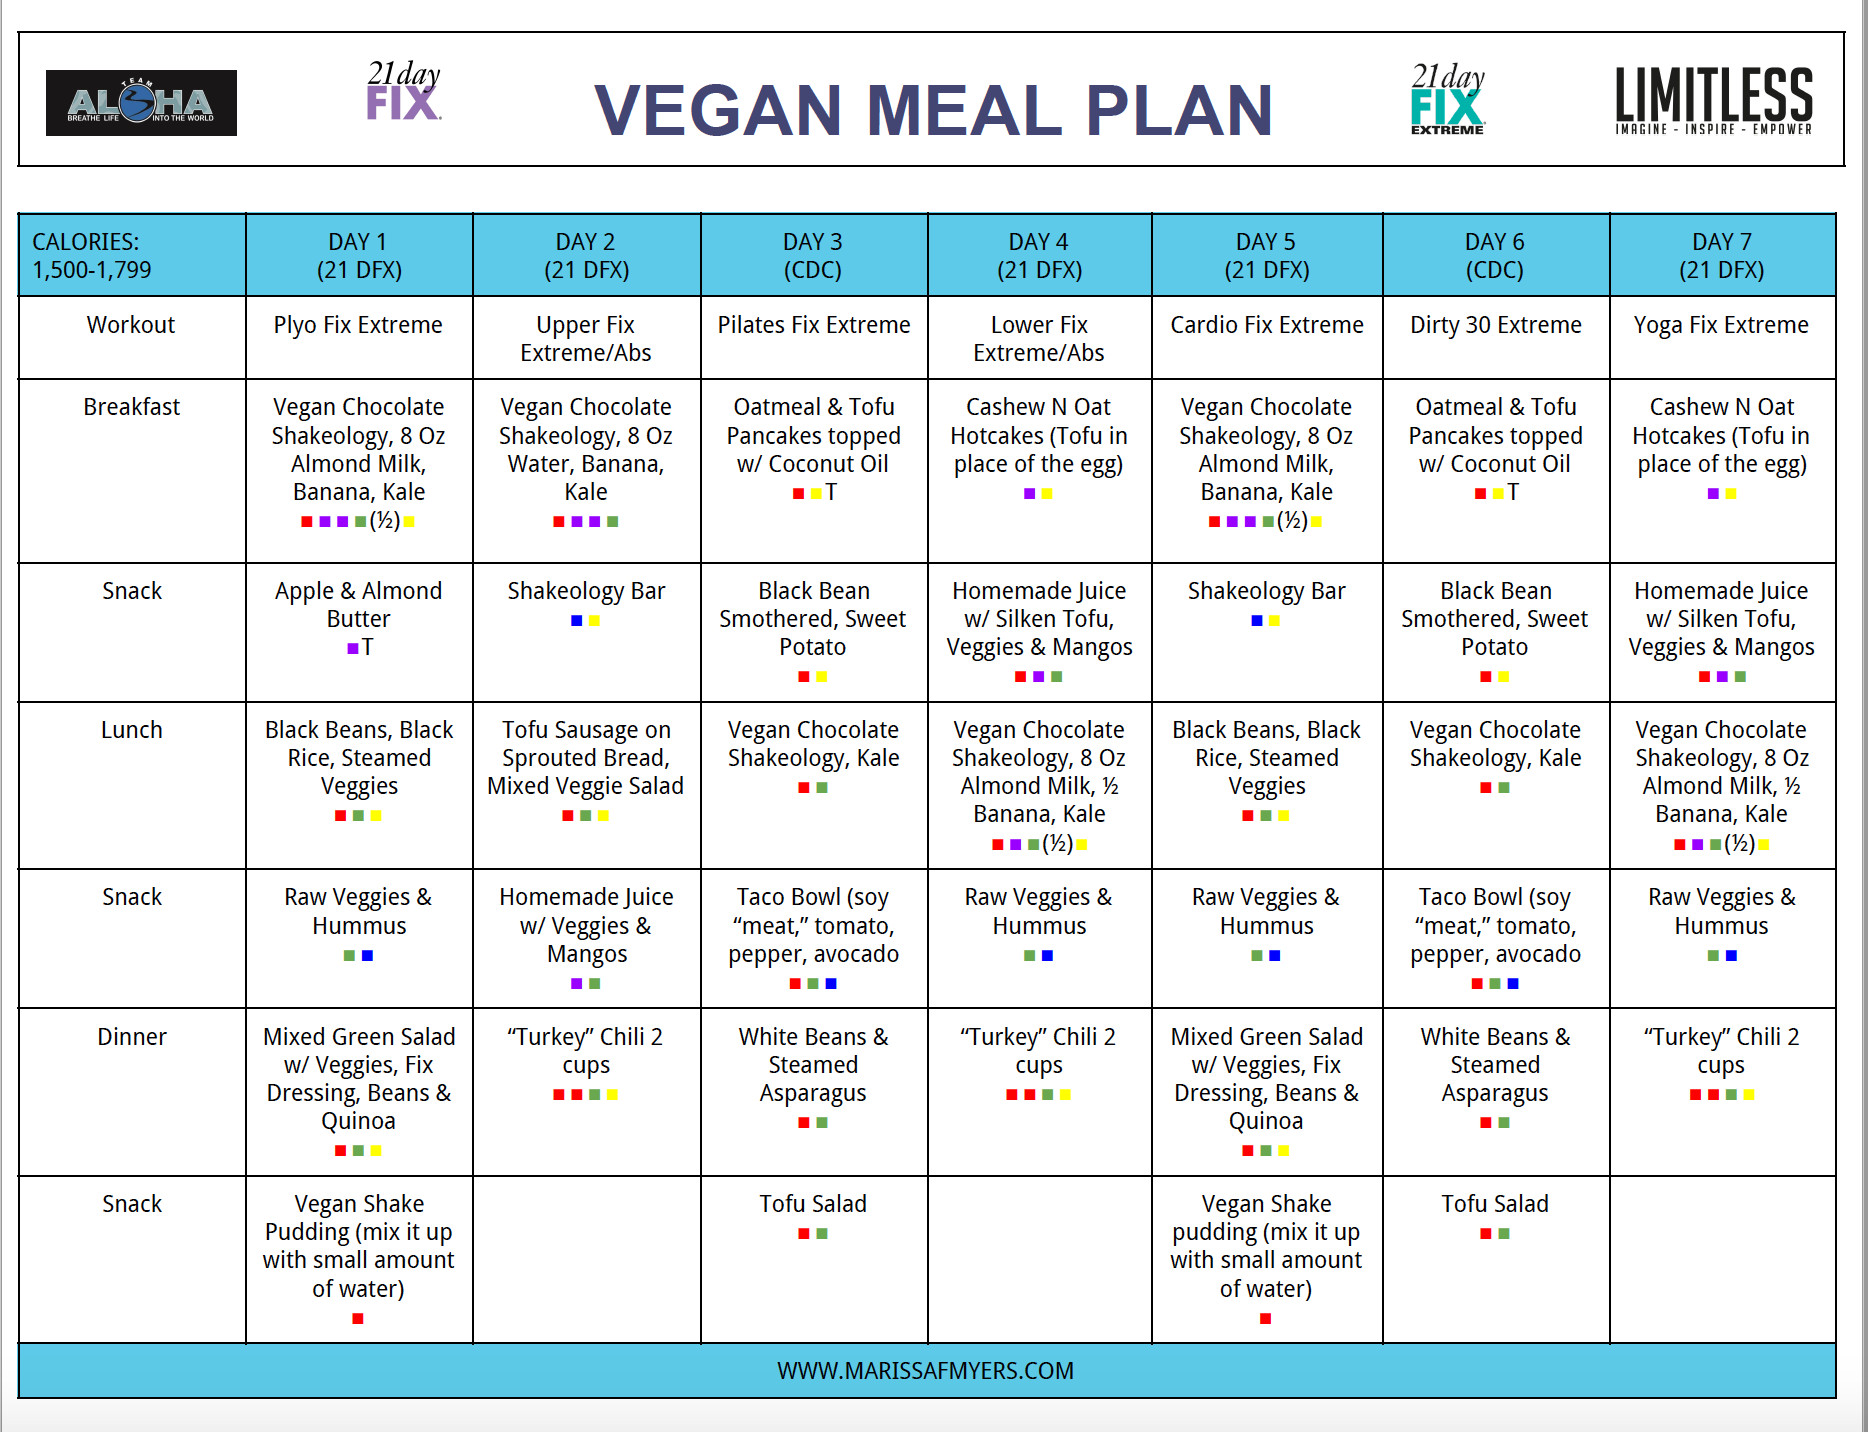 Vegan Diet Plan
 Get Prepped For The 21 Day Fix or 21 Day Fix EXTREME